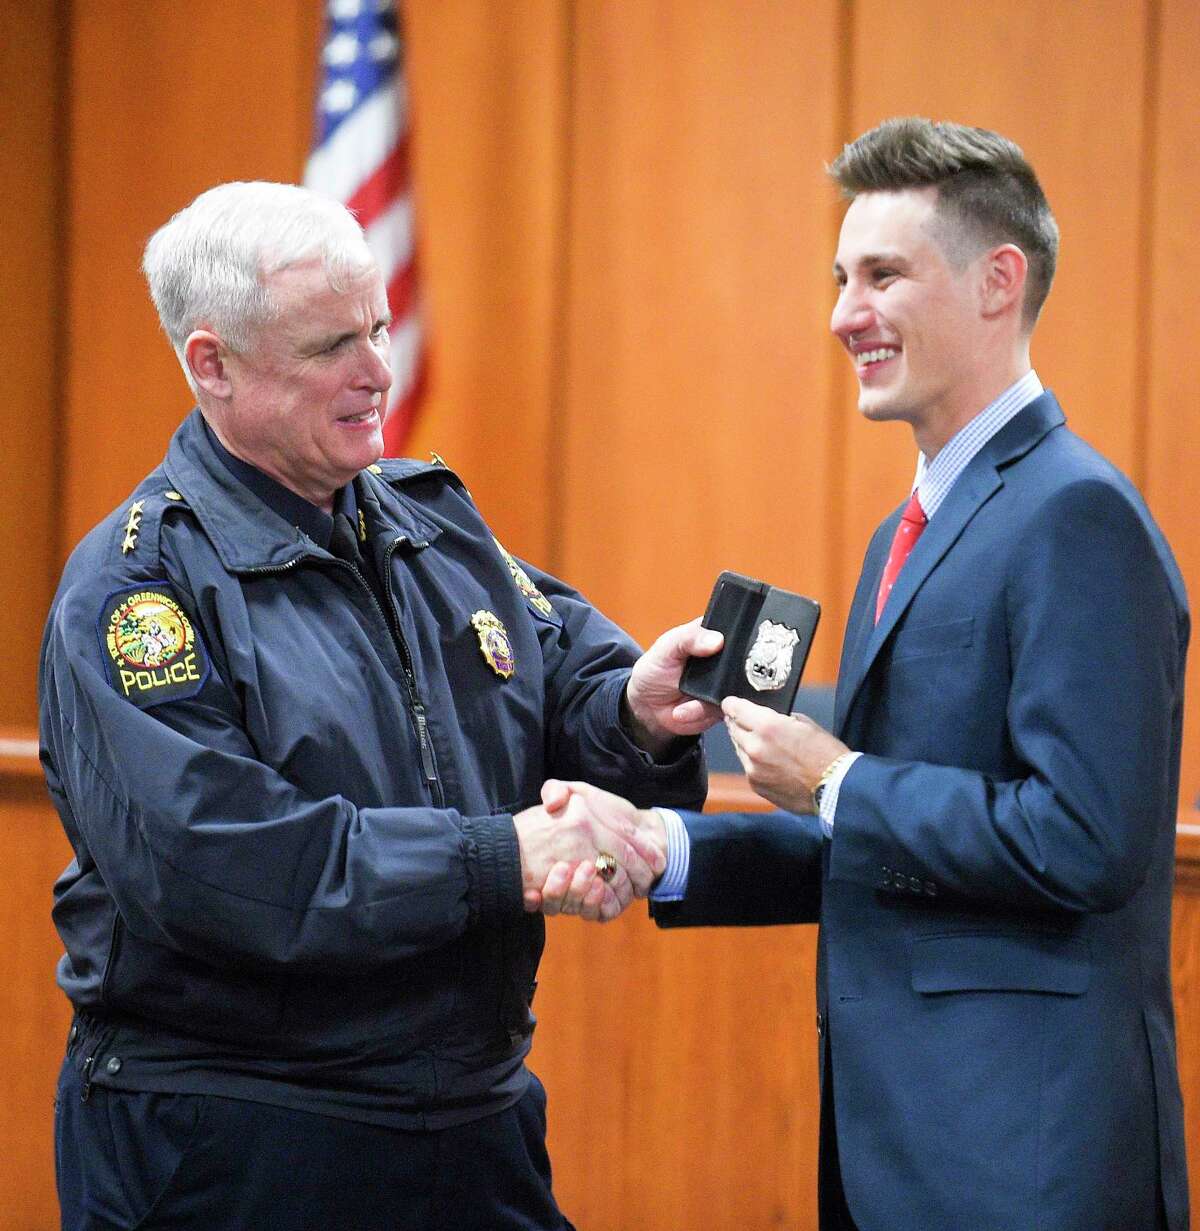 Greenwich Police Chief James Heavey officially hand Police Officer recruit Andrew Mitchell is badge on Nov. 12, 2019 in Greenwich, Connecticut after being sworn in at town hall by outgoing First Selectman Peter Tesei.